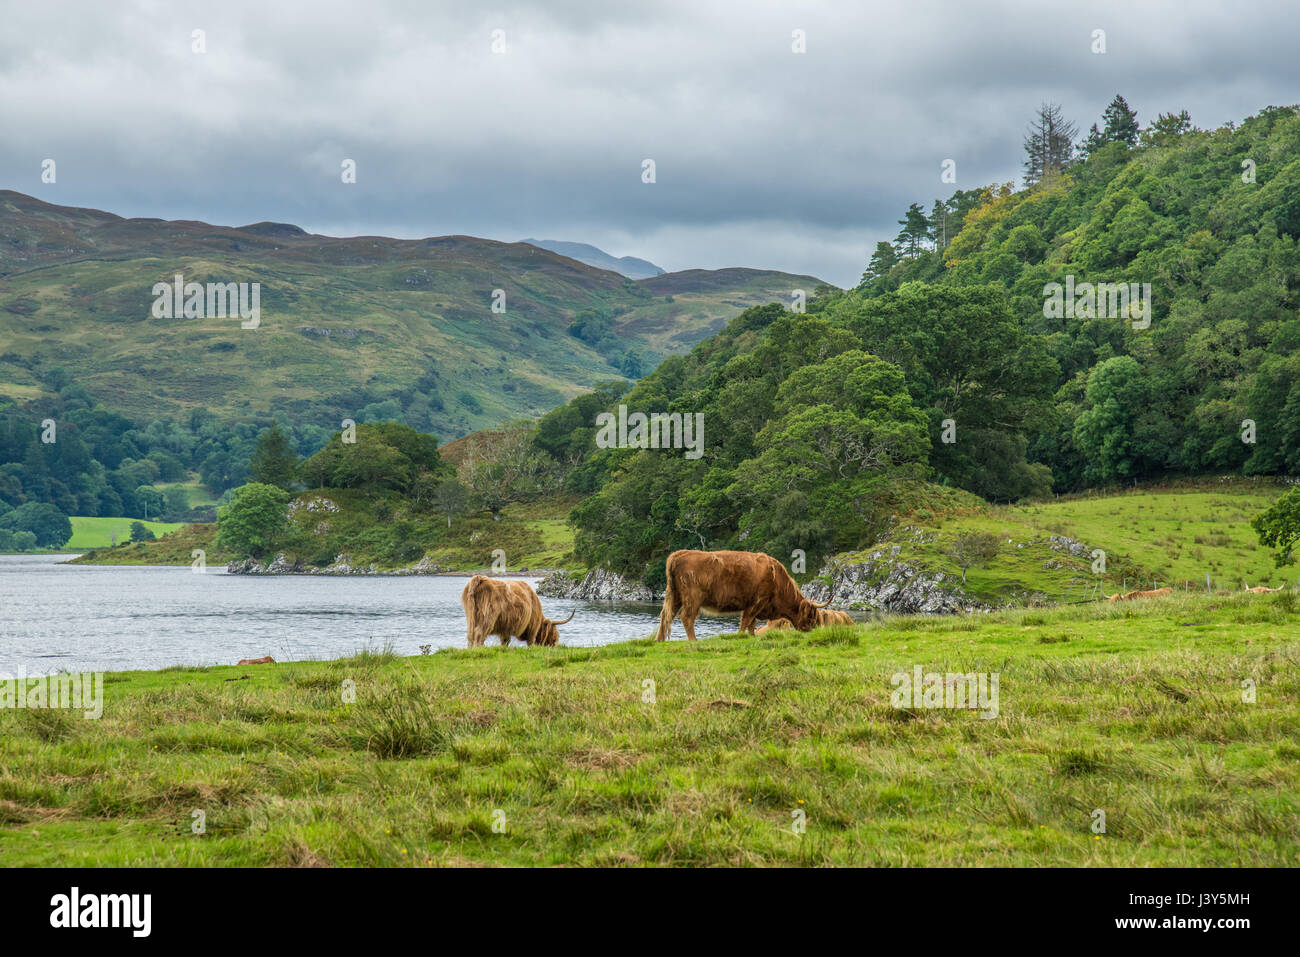 Highland cattle, Loch Etive, Oban, Argyll and Bute, Scotland. Stock Photo